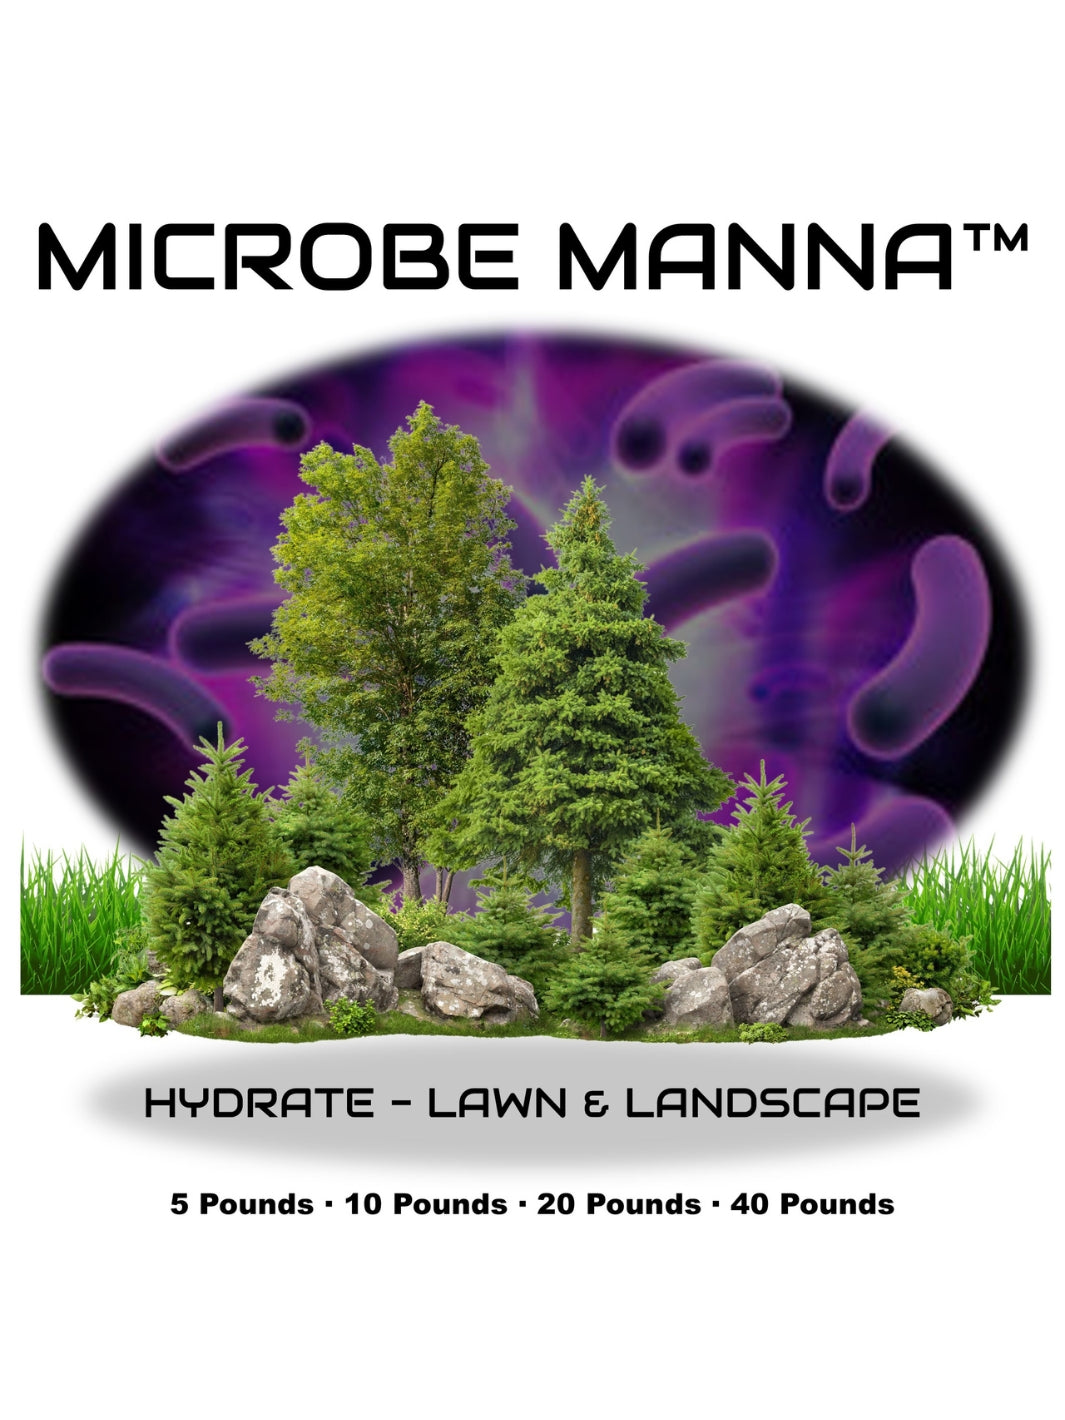 Microbe Manna™ Hydrate Lawn and Landscape exclusively from Rocky Mountain BioAg® Biological...Beyond Organic® growing practices | RMBA